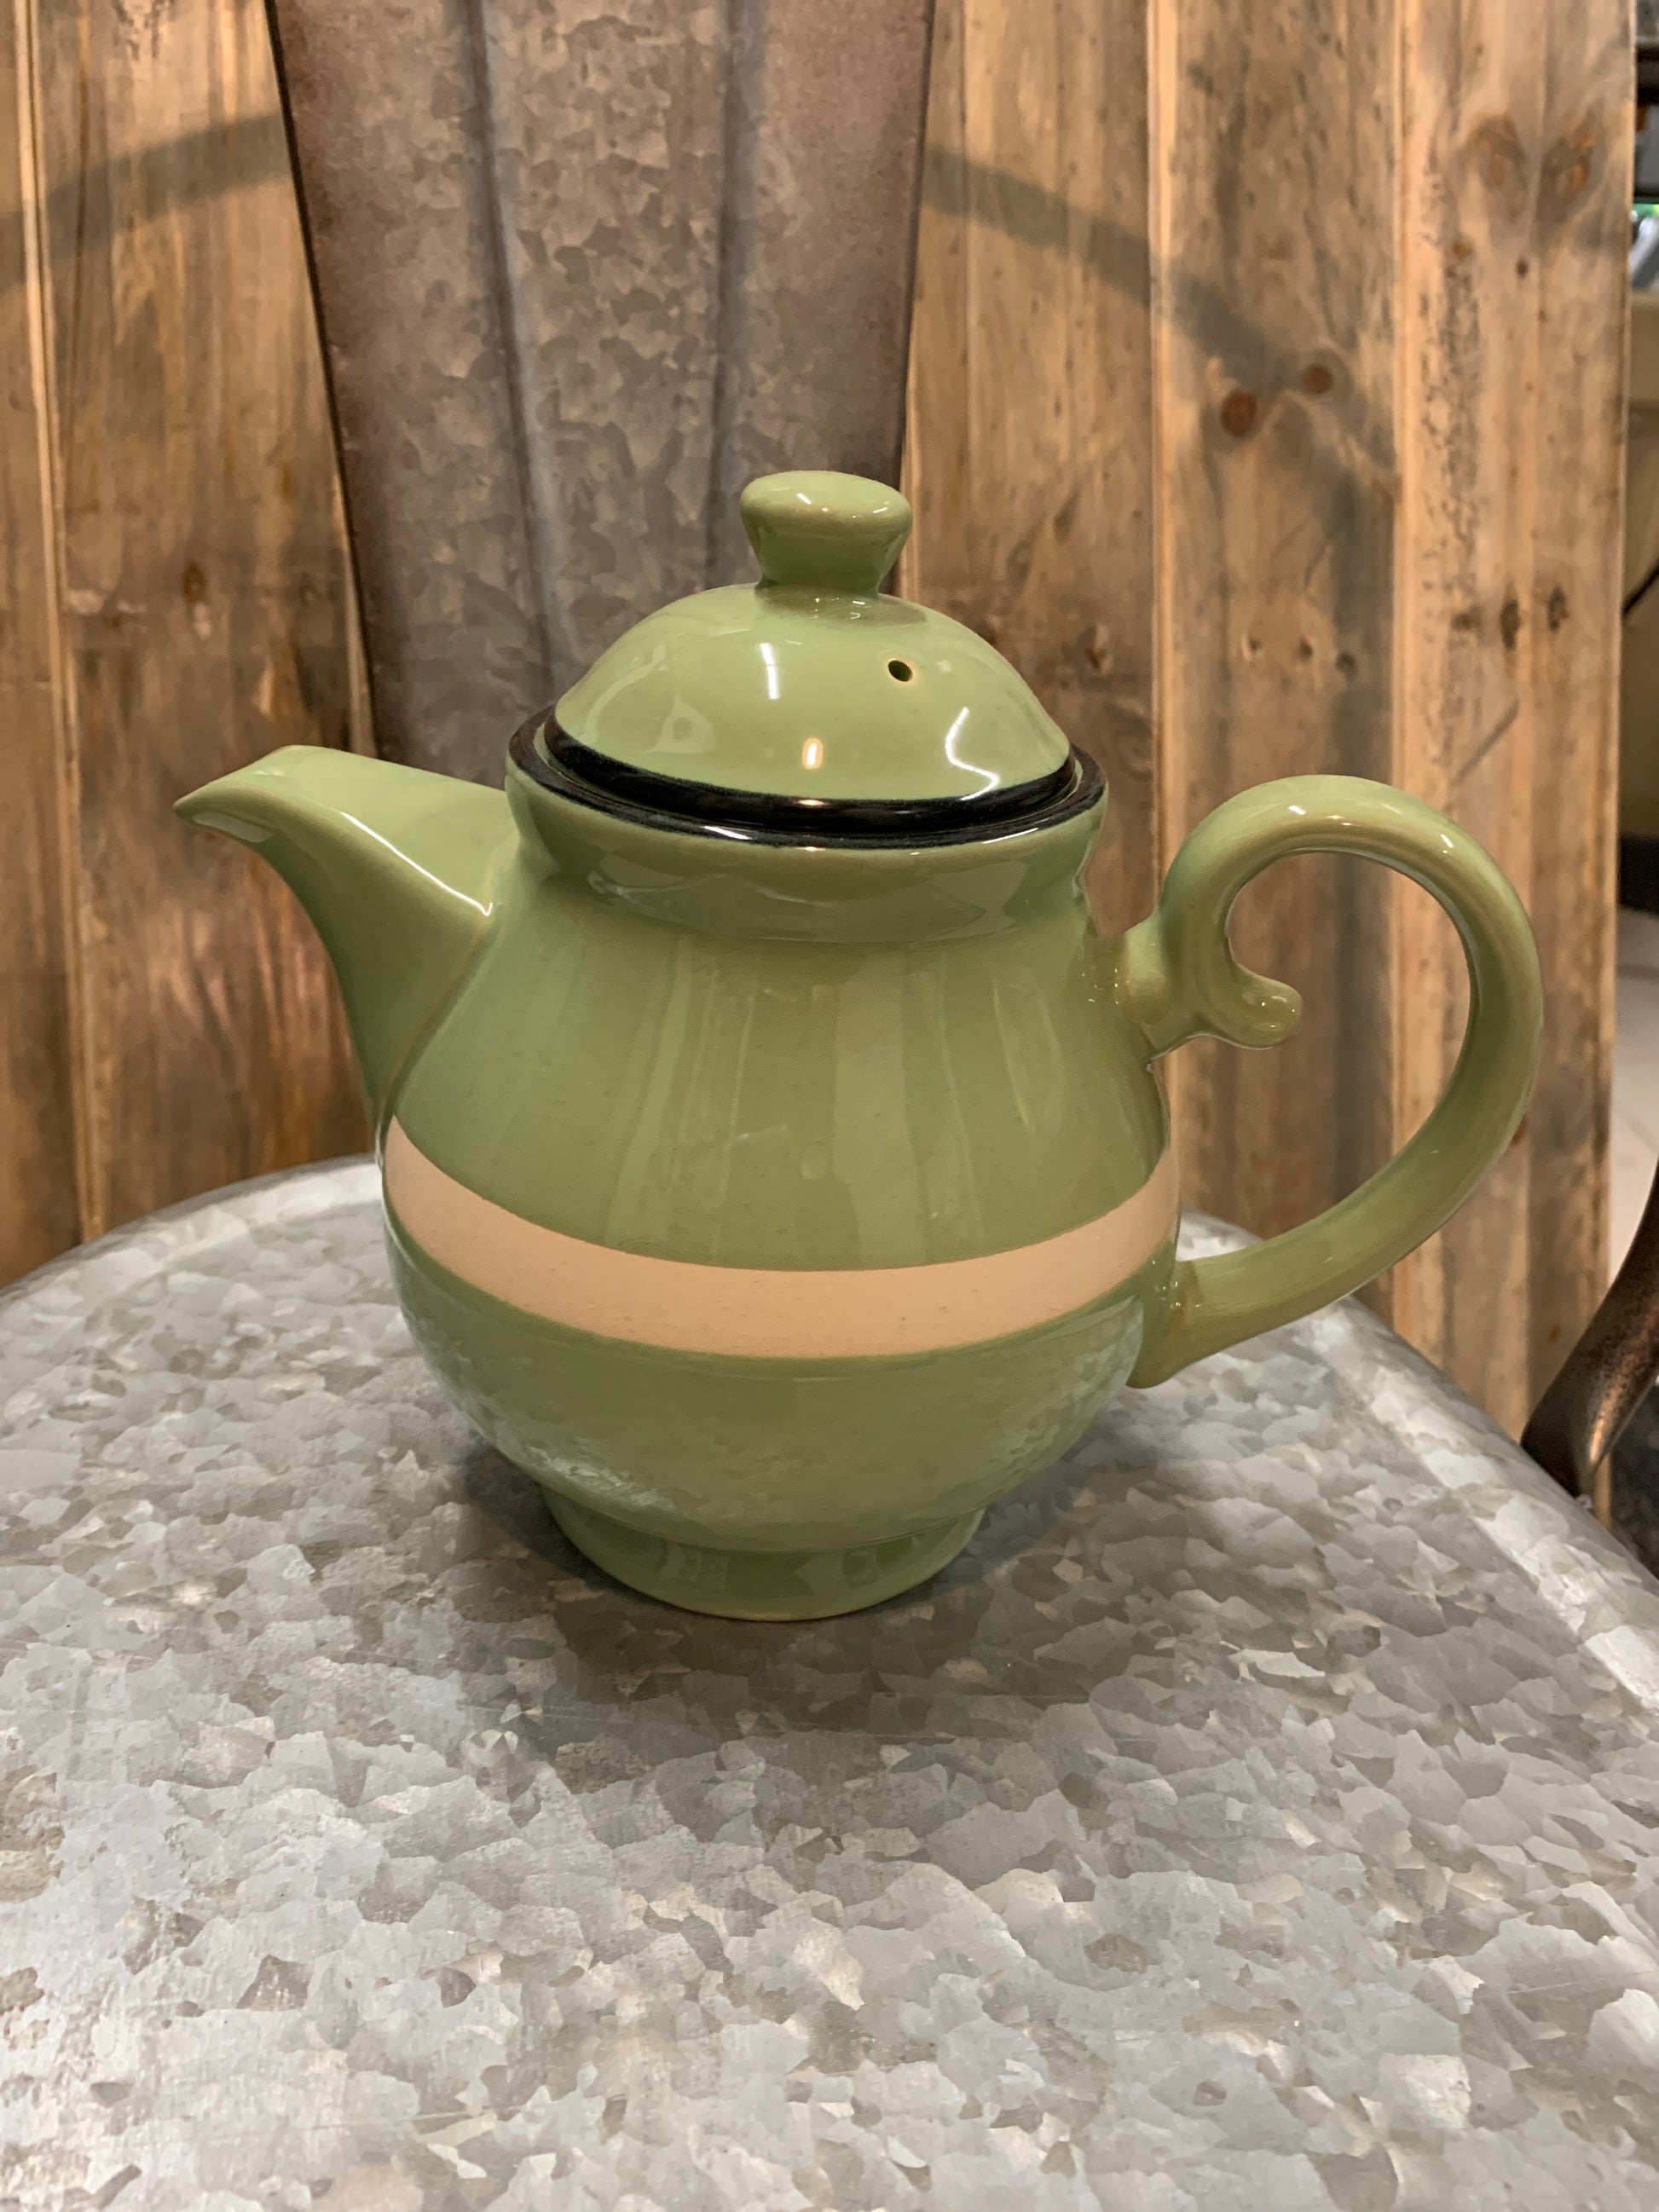 Perfect teapot for one! Comes with a strainer so it's perfect for loose leaf tea.